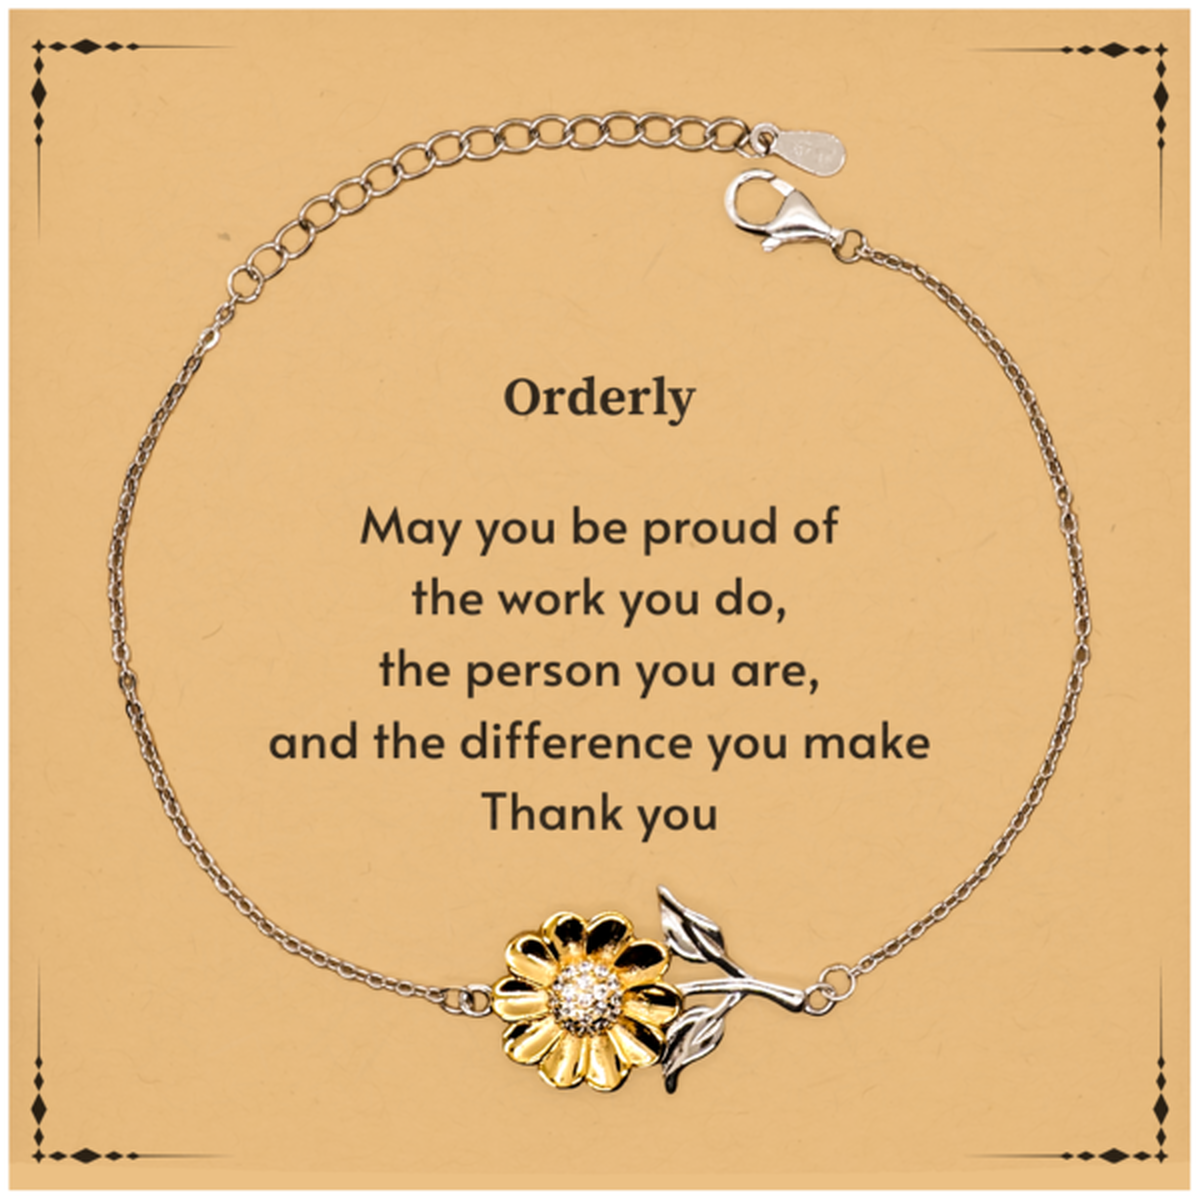 Heartwarming Sunflower Bracelet Retirement Coworkers Gifts for Orderly, Orderly May You be proud of the work you do, the person you are Gifts for Boss Men Women Friends